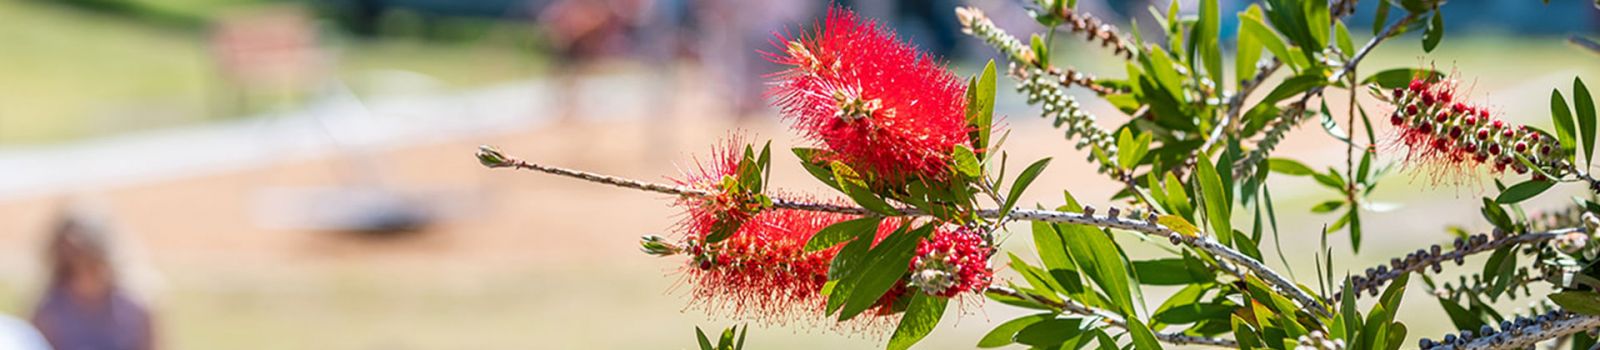 Close up photo of a red bottle brush over looking a park banner image